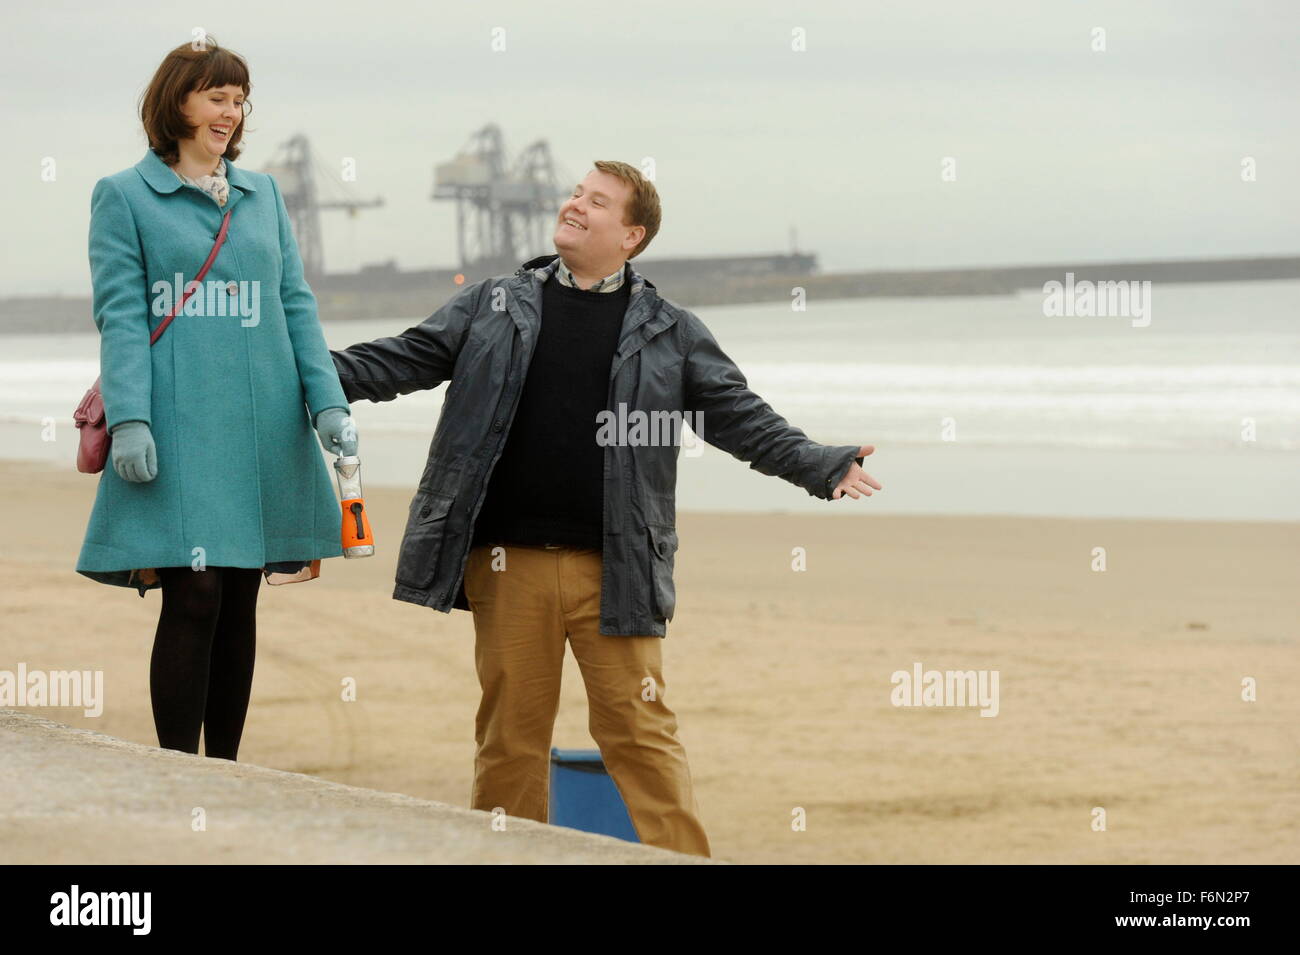 RELEASE DATE: February 7, 2014 TITLE: One Chance STUDIO: TriStar Pictures DIRECTOR: David Frankel PLOT: The true story of Paul Potts, a shy, bullied shop assistant by day and an amateur opera singer by night who became a phenomenon after being chosen for and ultimately winning Britain's Got Talent' PICTURED: ALEXANDRA ROACH as Julz and JAMES CORDEN as Paul (Credit Image: c The Weinstein Company/Entertainment Pictures) Stock Photo